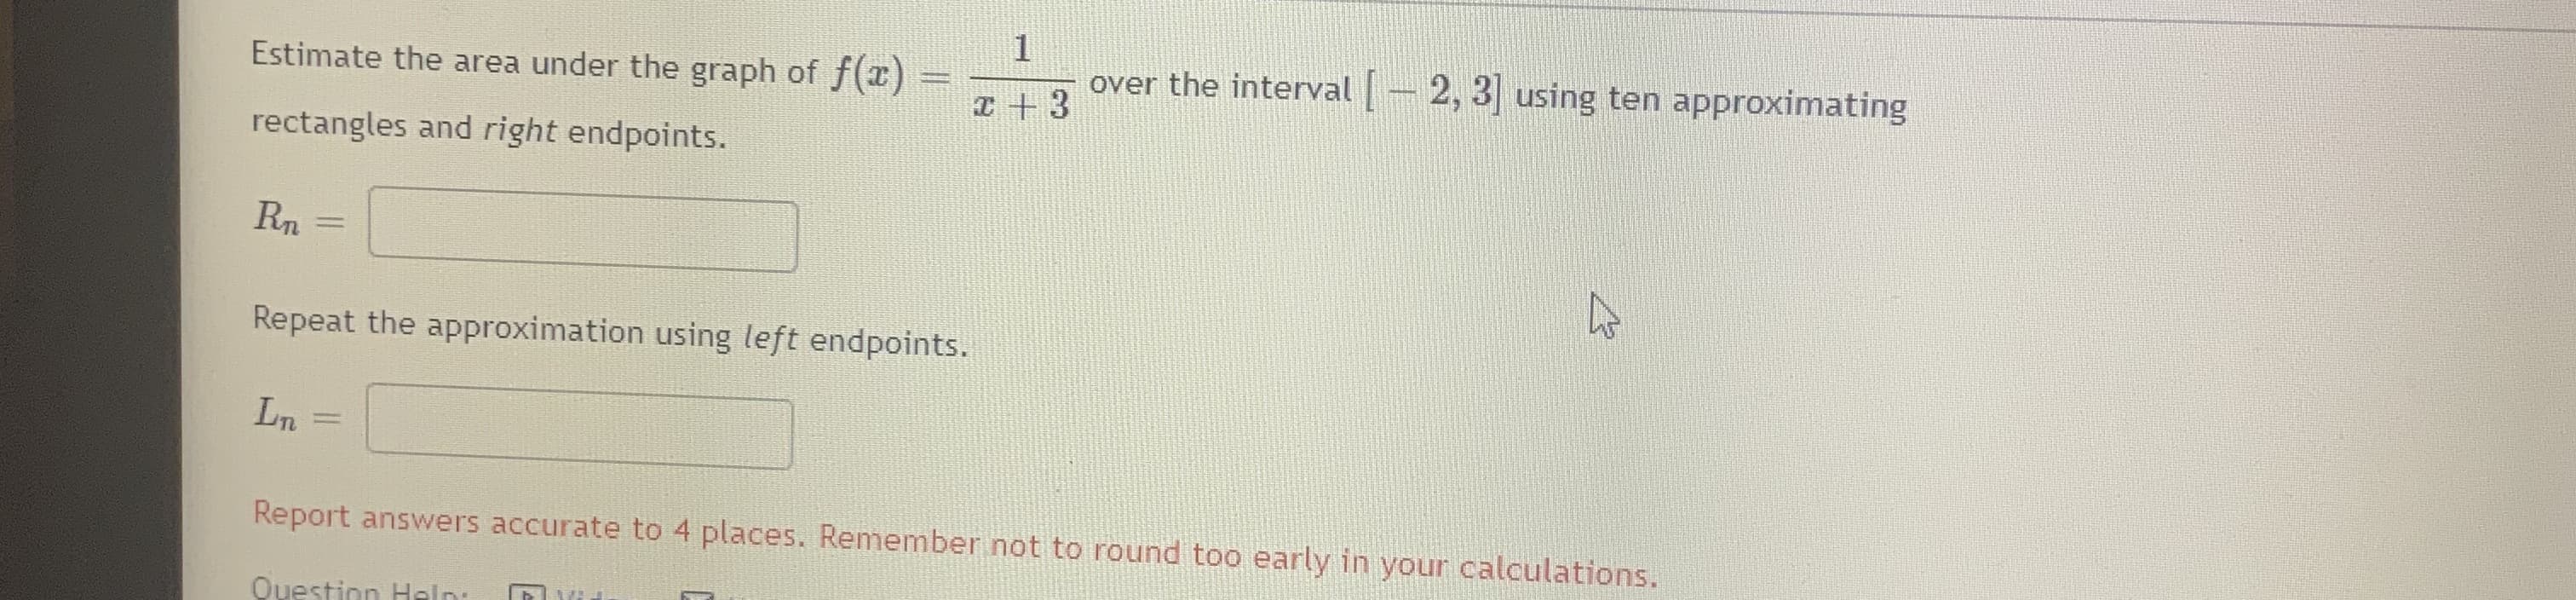 Estimate the area under the graph of f(z)
over the interval-2, 3 using ten approximating
I +3
rectangles and right endpoints.
Repeat the approximation using left endpoints.
Ln
Report answers accurate to 4 places. Remember.not to round too early in your calculations.
